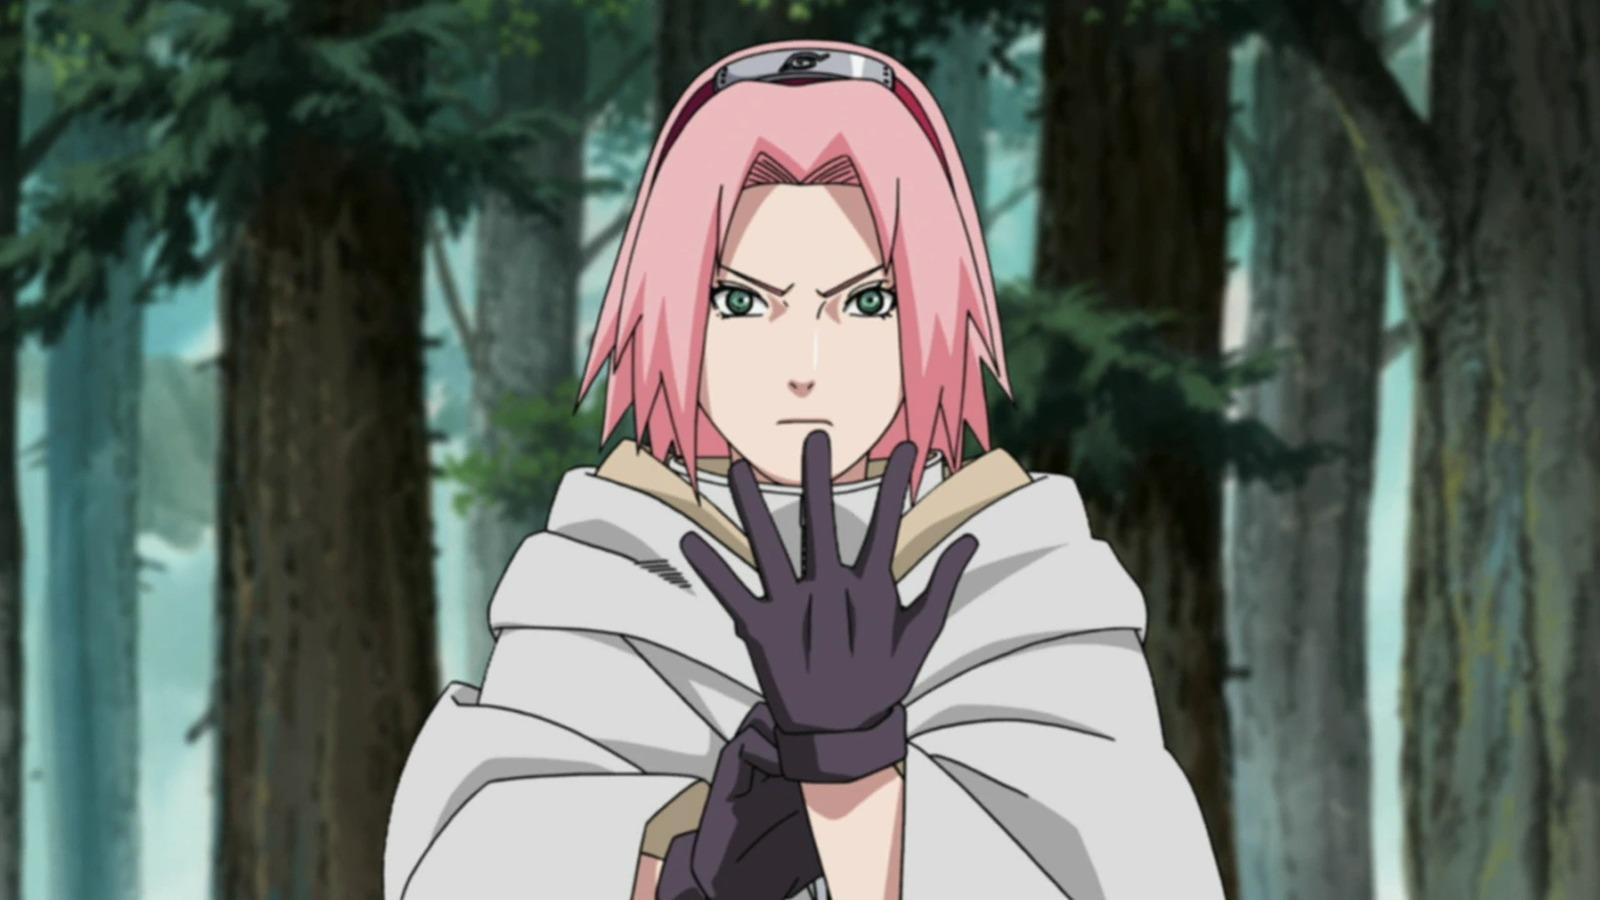 An image of Sakura from Naruto wearing her gloves before battle